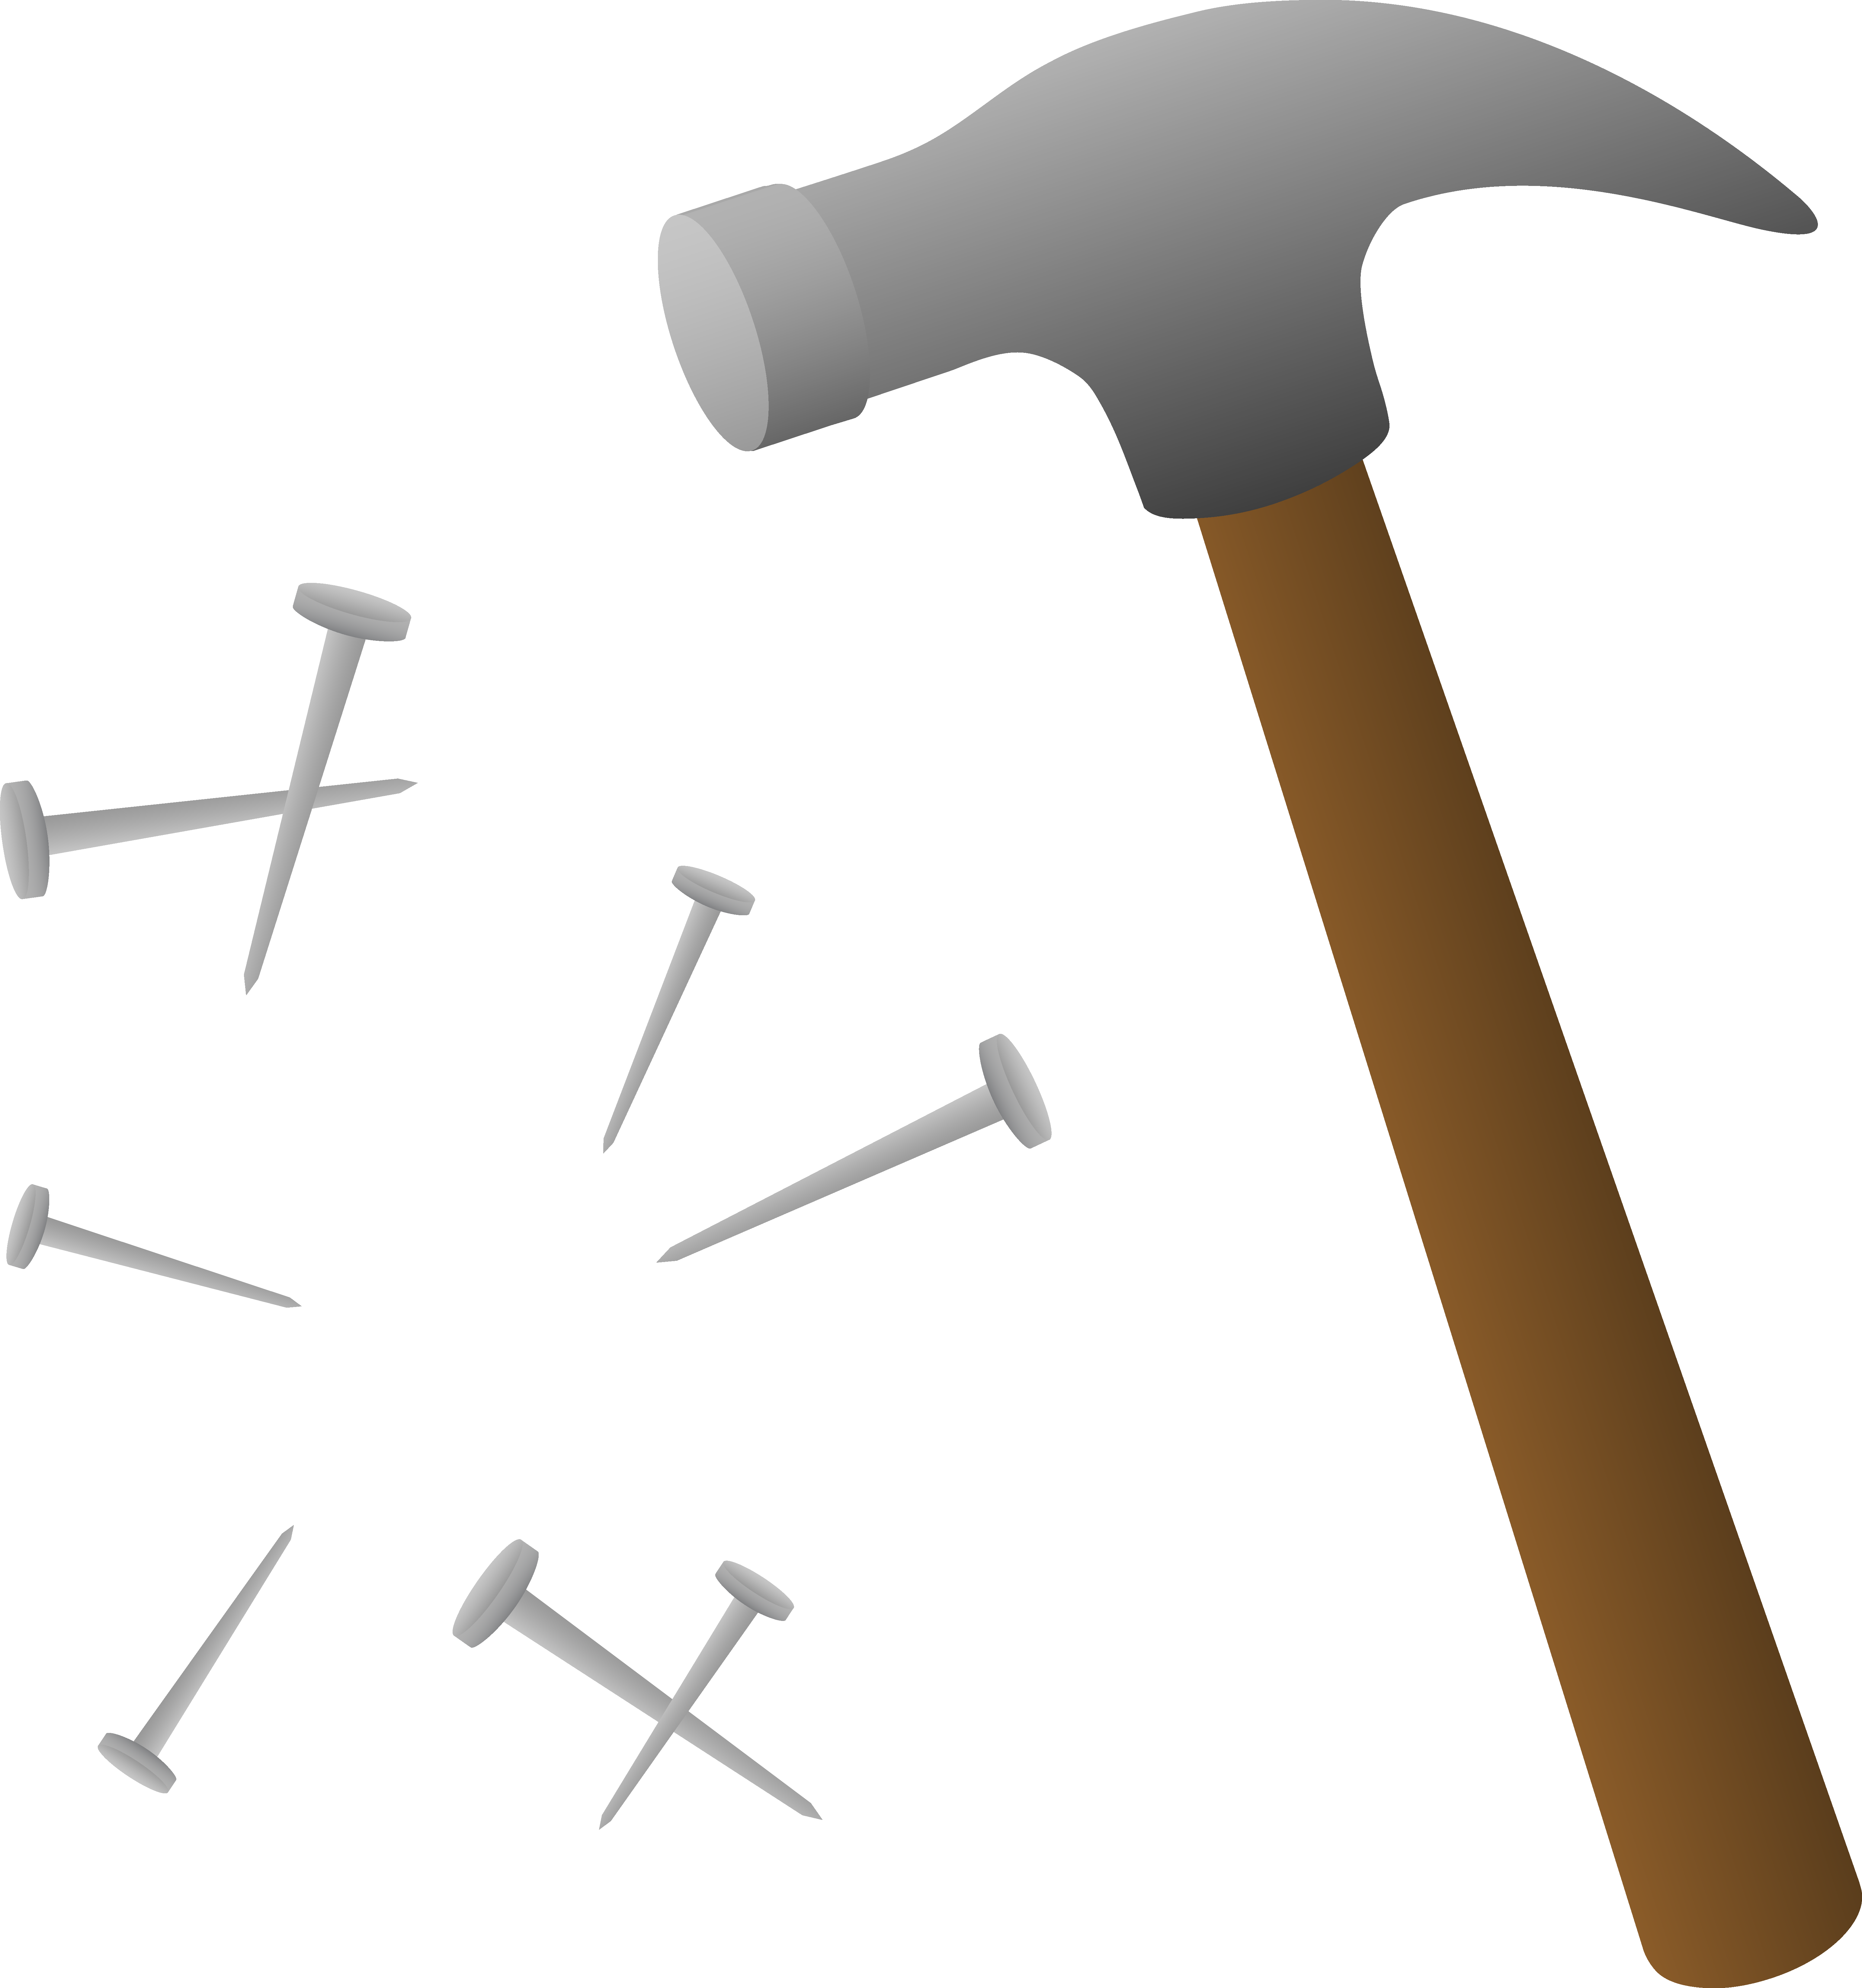 Hammer With Scattered Nails - Free Clip Art